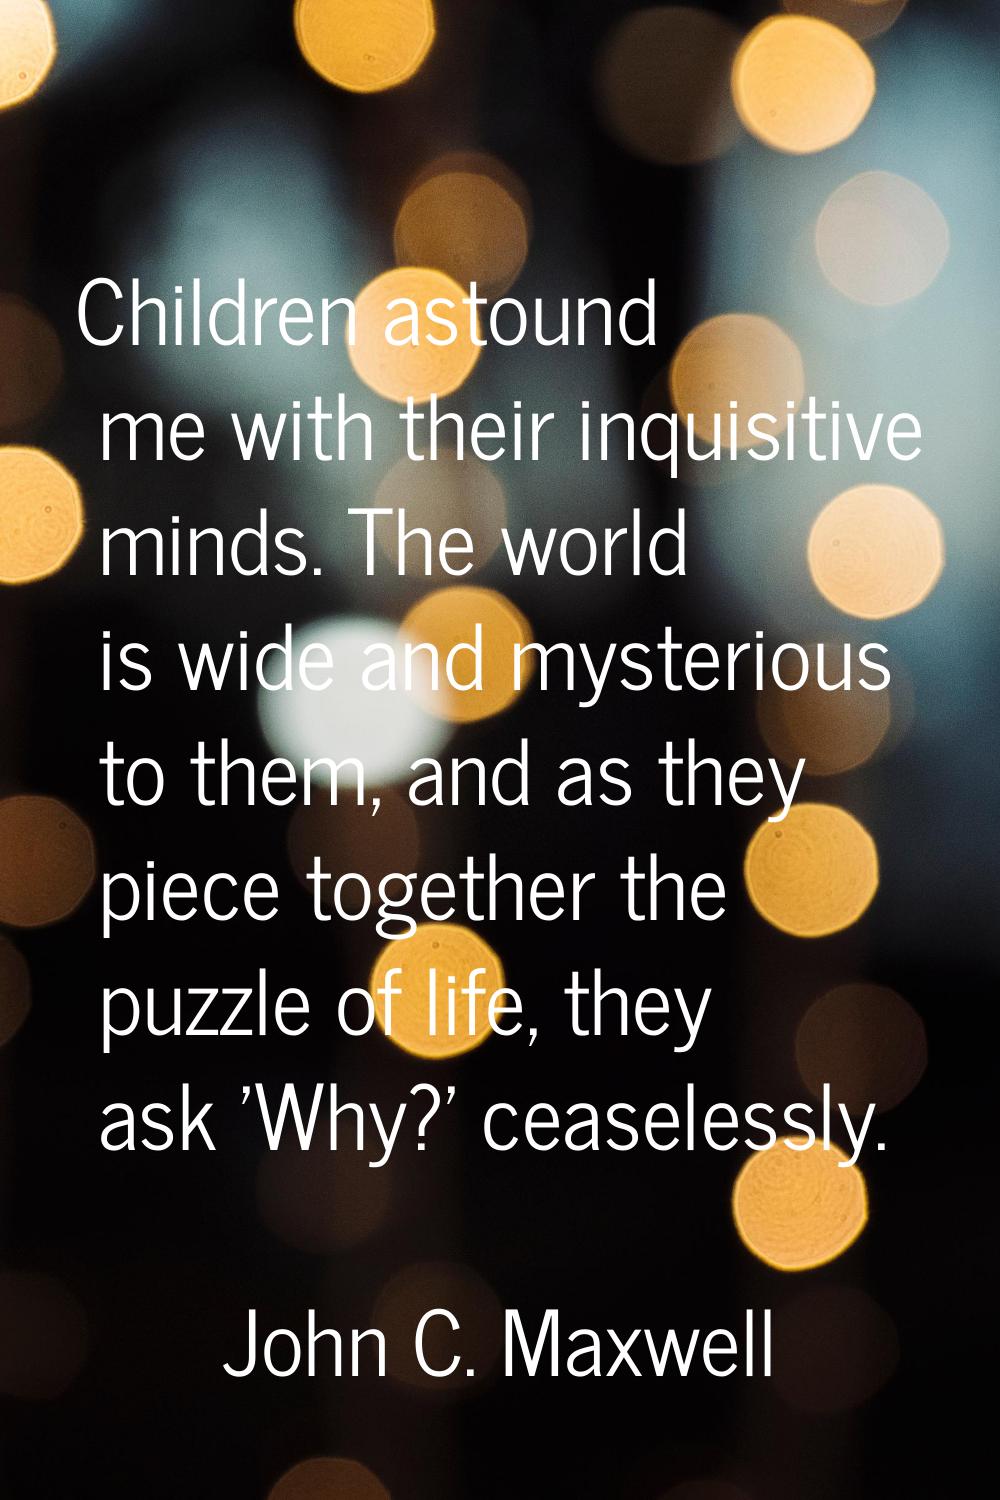 Children astound me with their inquisitive minds. The world is wide and mysterious to them, and as 